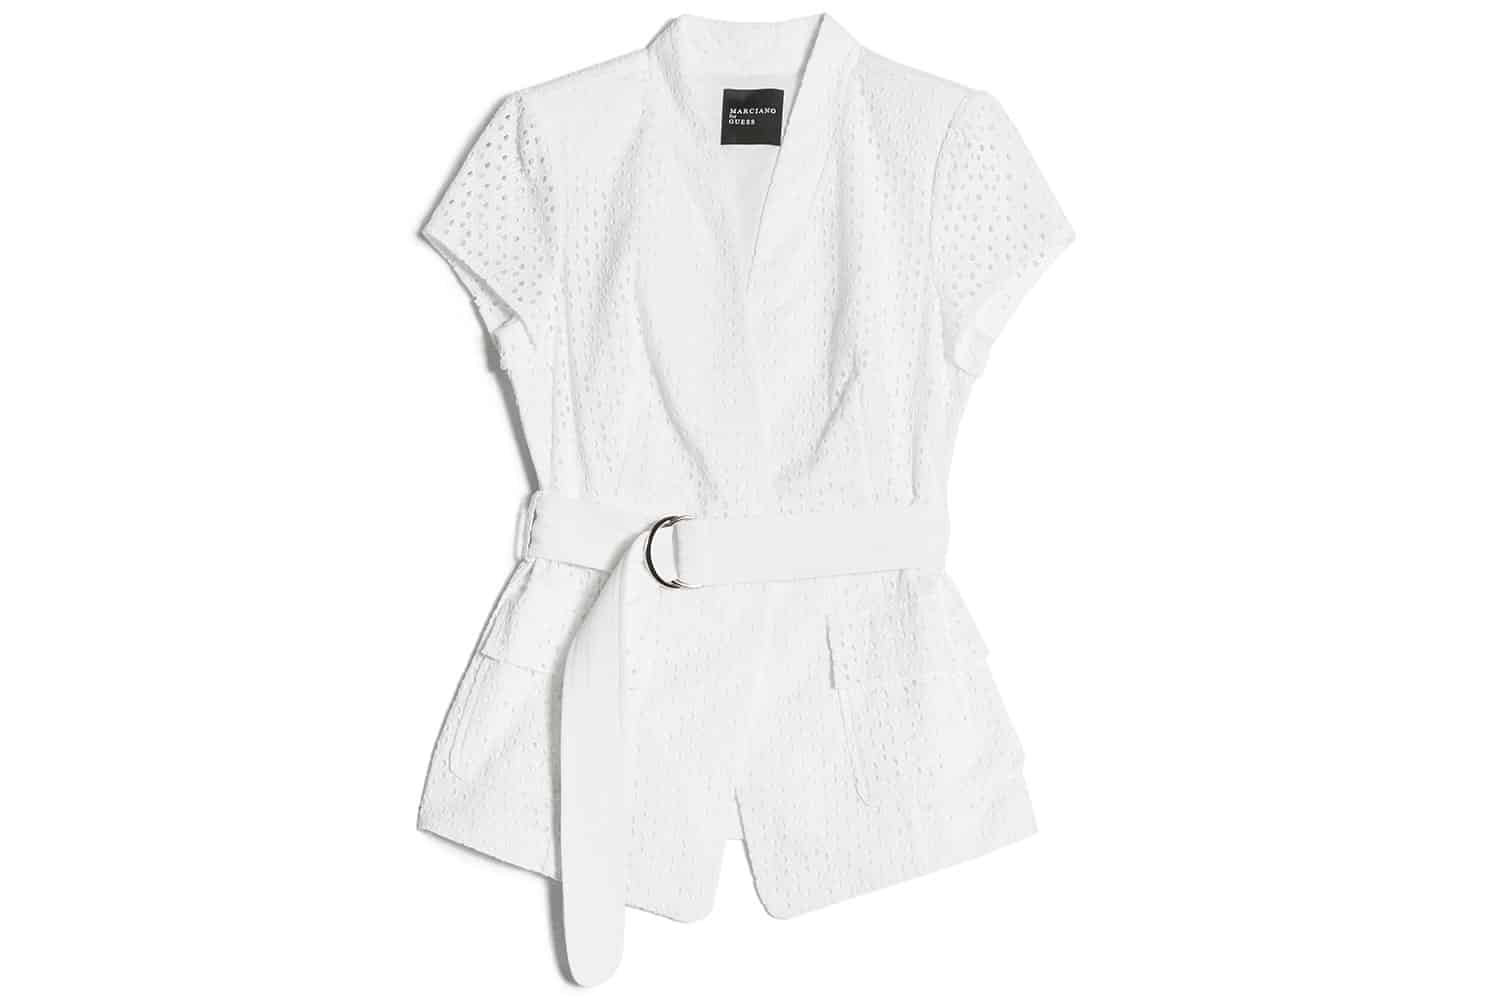 Editor's Pick: Marciano for Guess Tarida Belted Eyelet Blazer